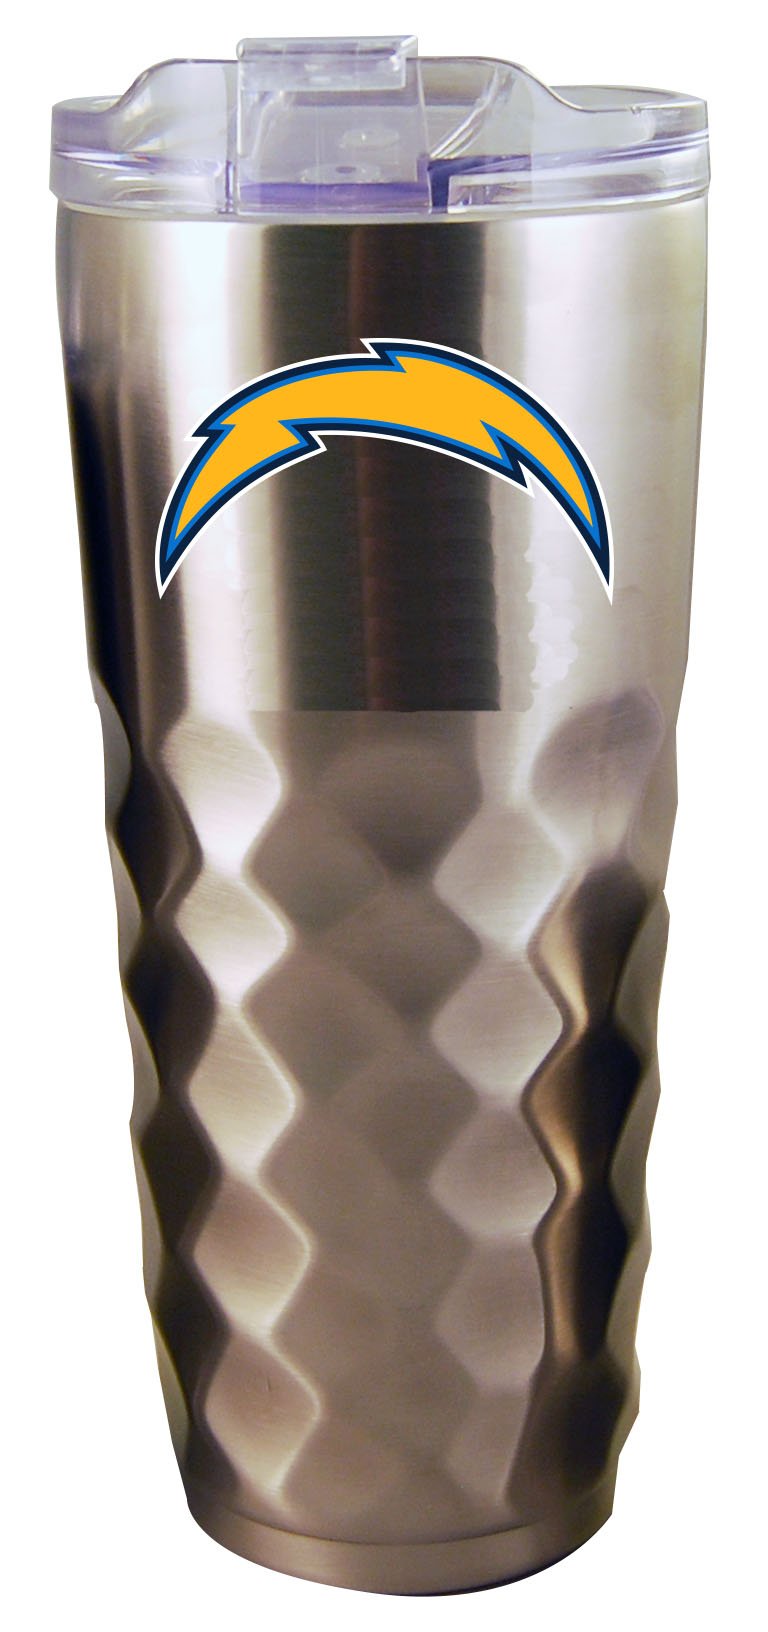 32OZ SS DIAMD TMBLR CHARGERS
CurrentProduct, Drinkware_category_All, LAC, Los Angeles Chargers, NFL
The Memory Company